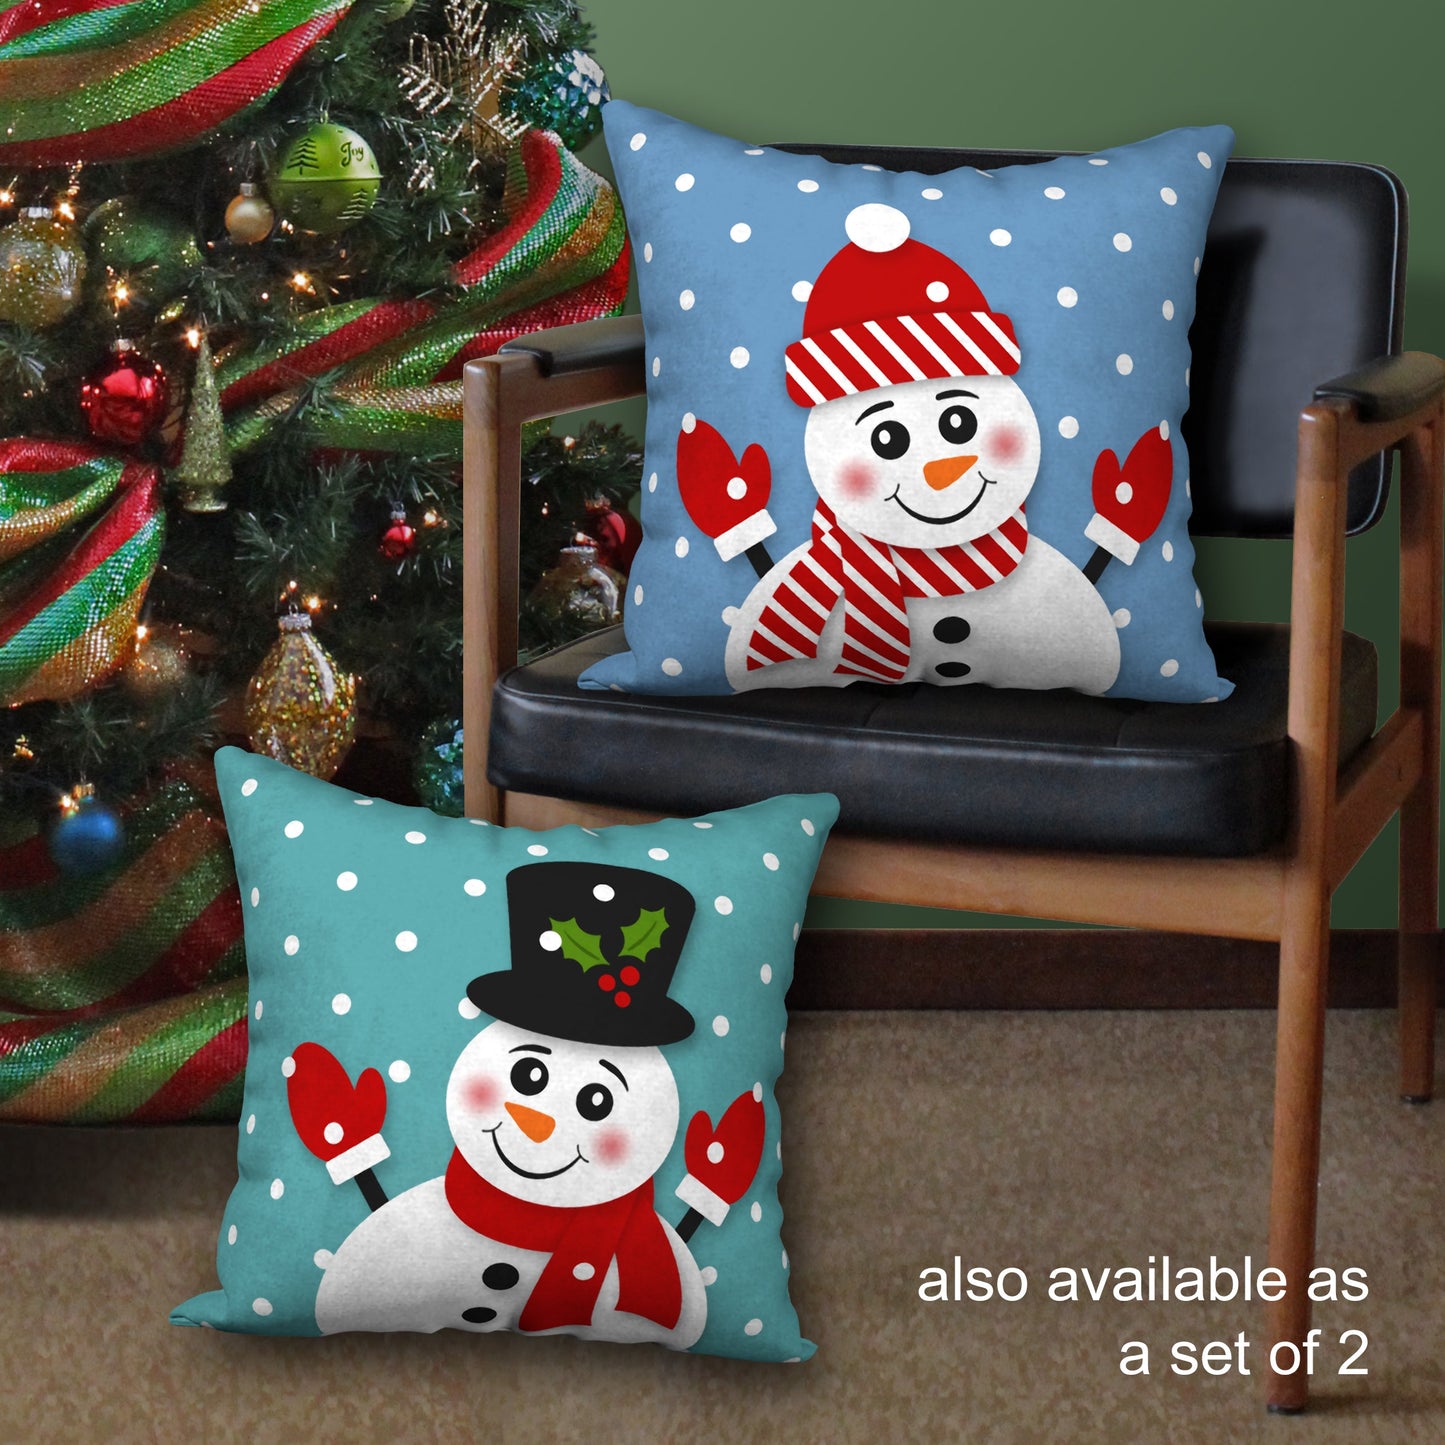 Red Hat Snowman Designer Holiday Pillow, 18"x18"